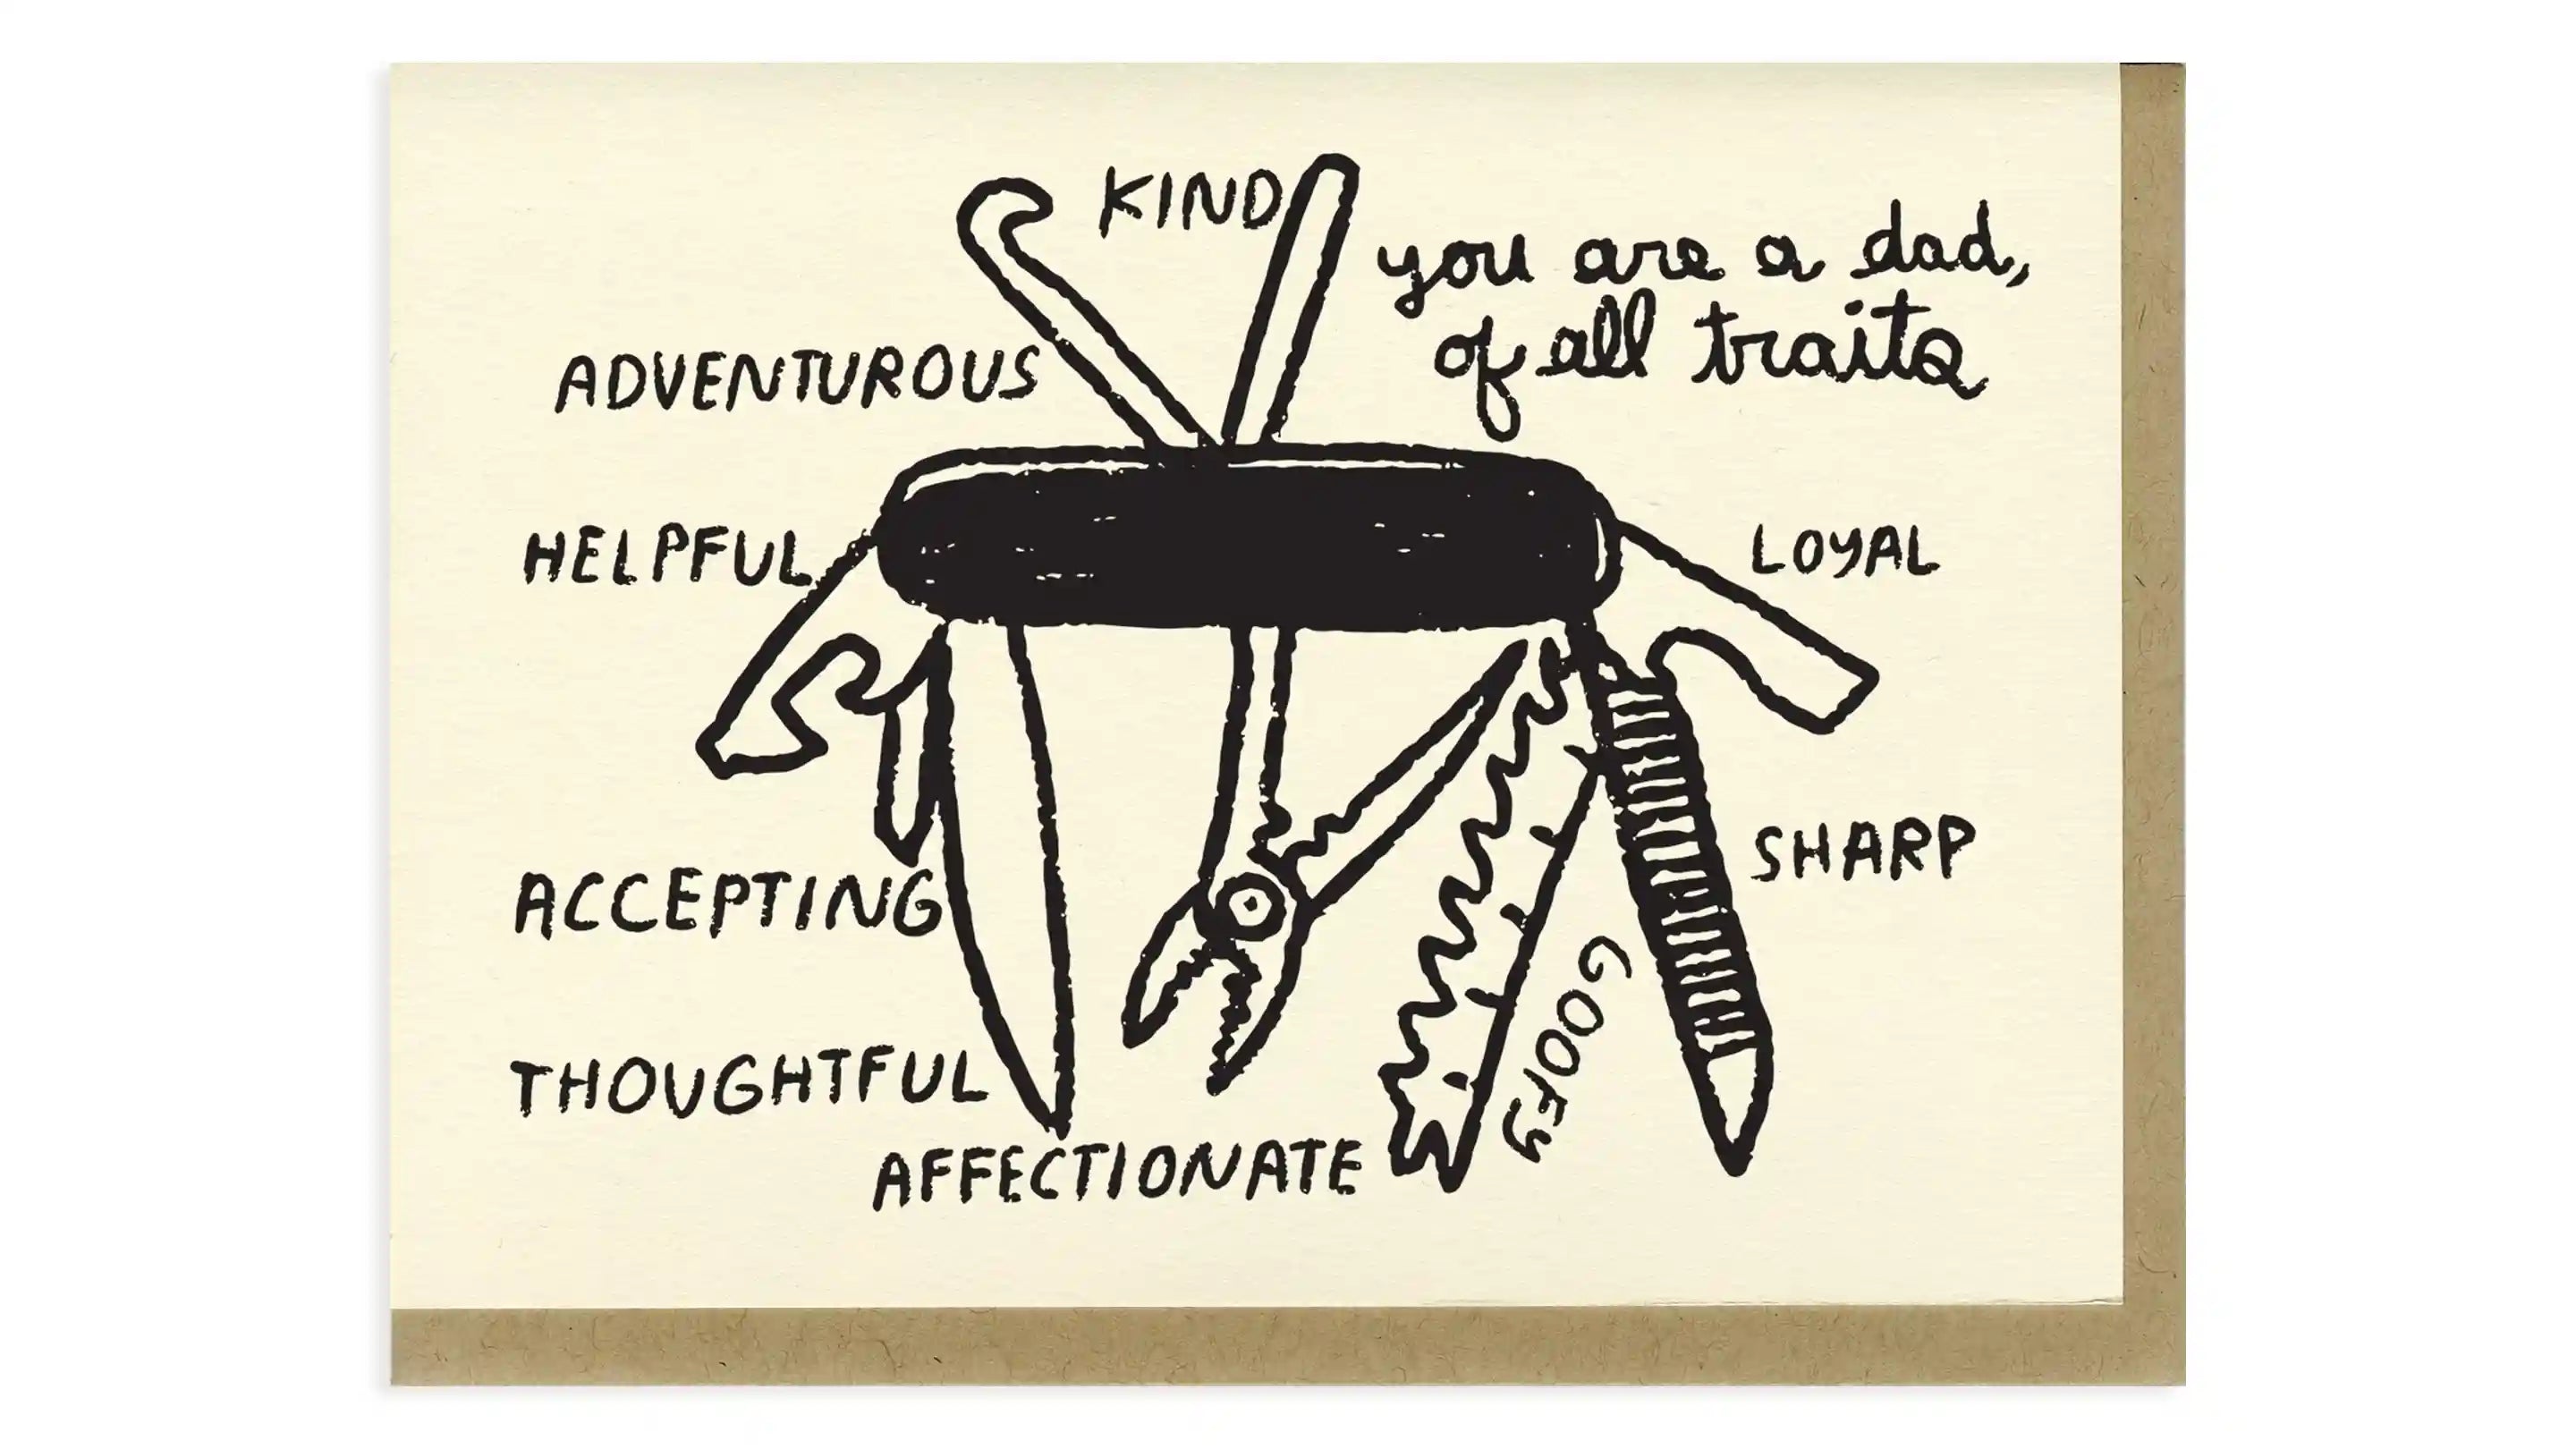 A greeting card with an illustration of a swiss army knife with various words written on it